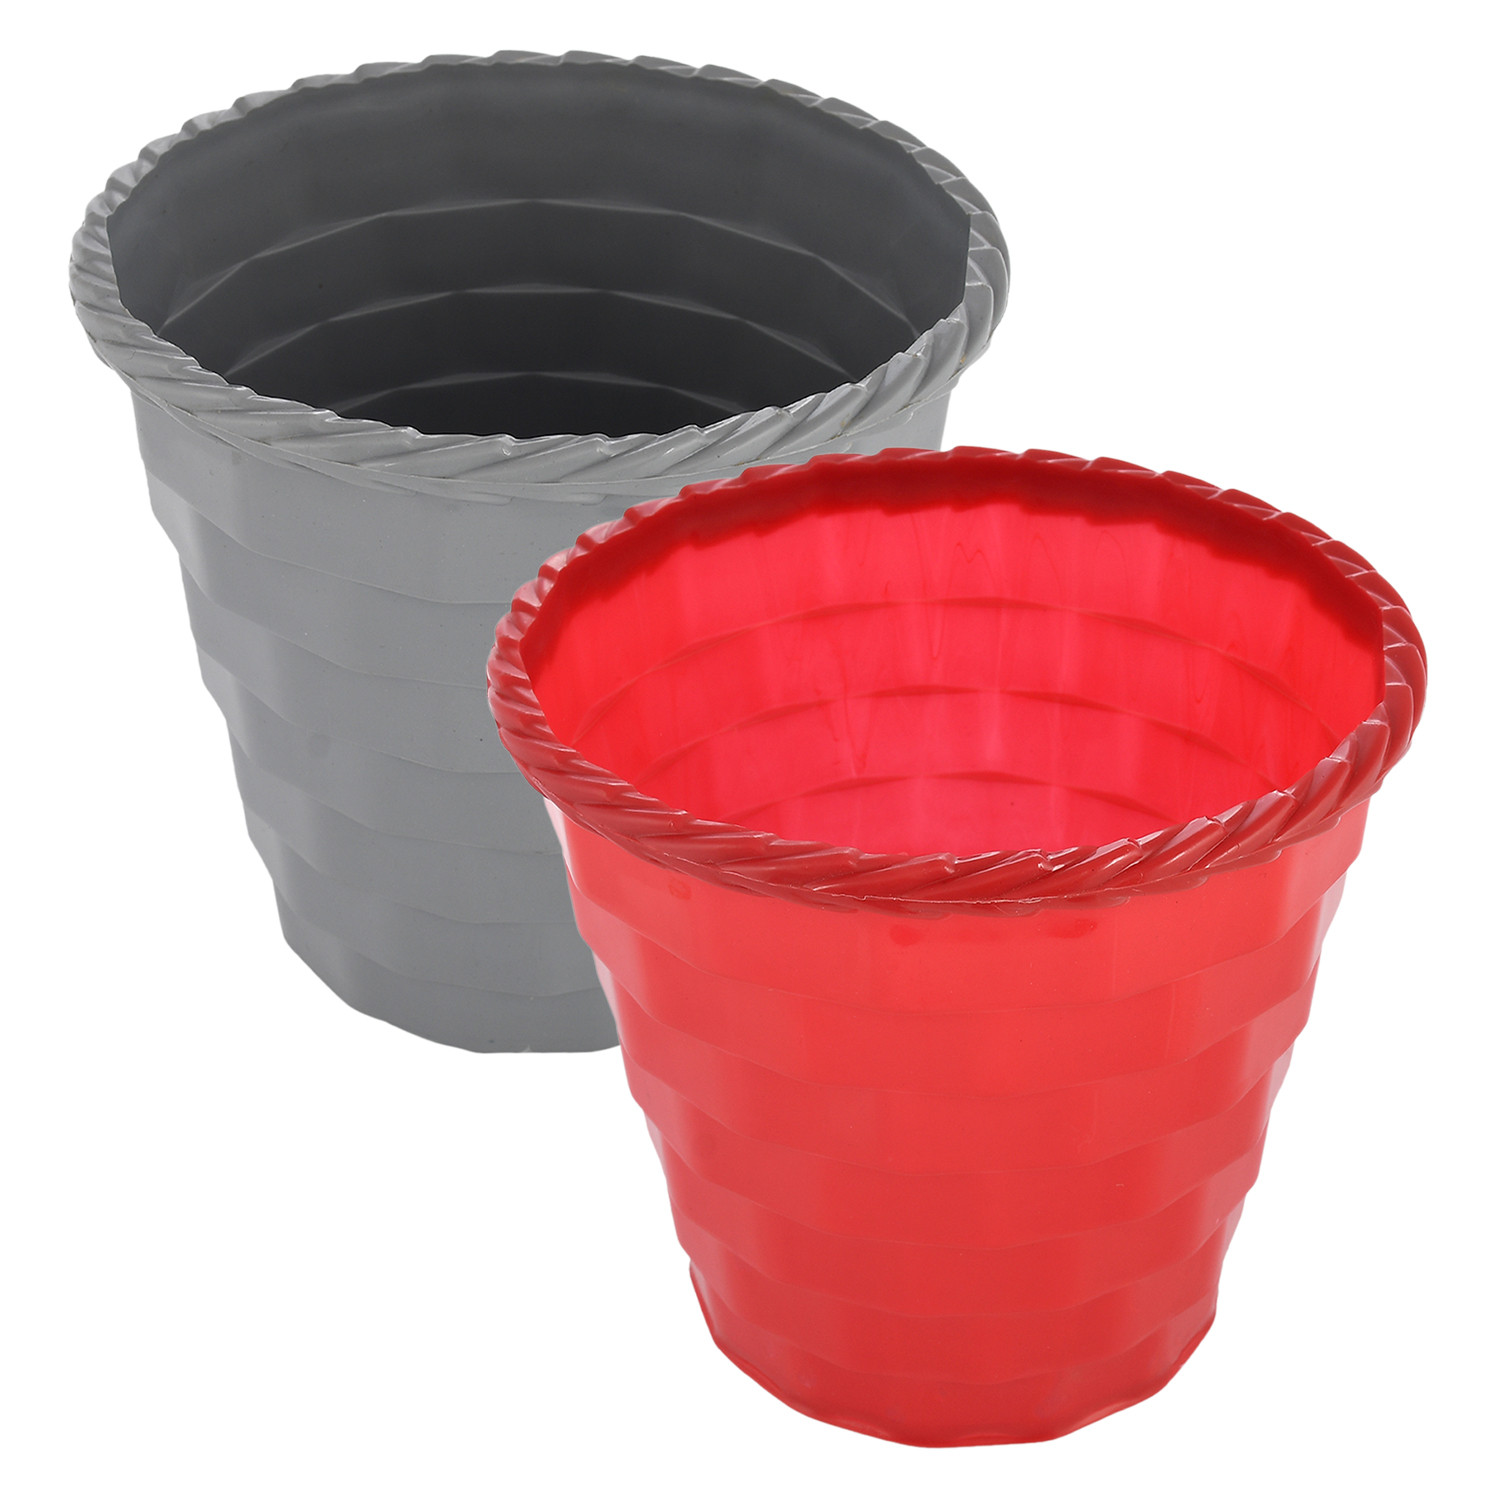 Kuber Industries Brick Flower Pot|Durable Plastic Flower Pots|Planters for Home Décor|Garden|Living Room|Balcony|8 Inch|Pack of 2 (Red & Grey)